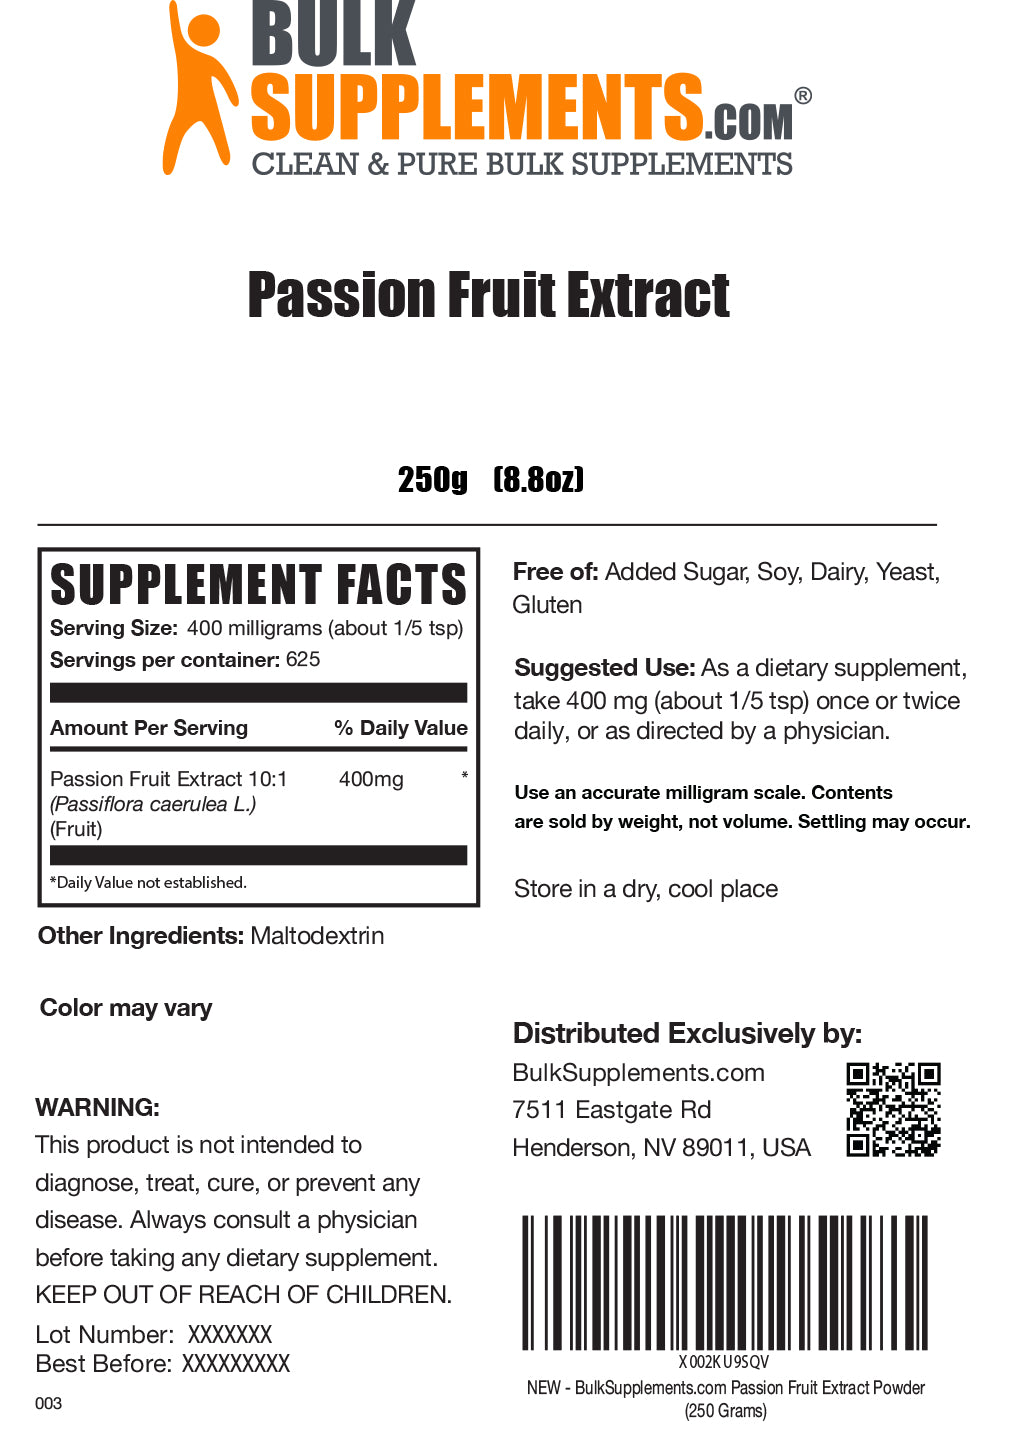 Passion Fruit Extract Label 250g